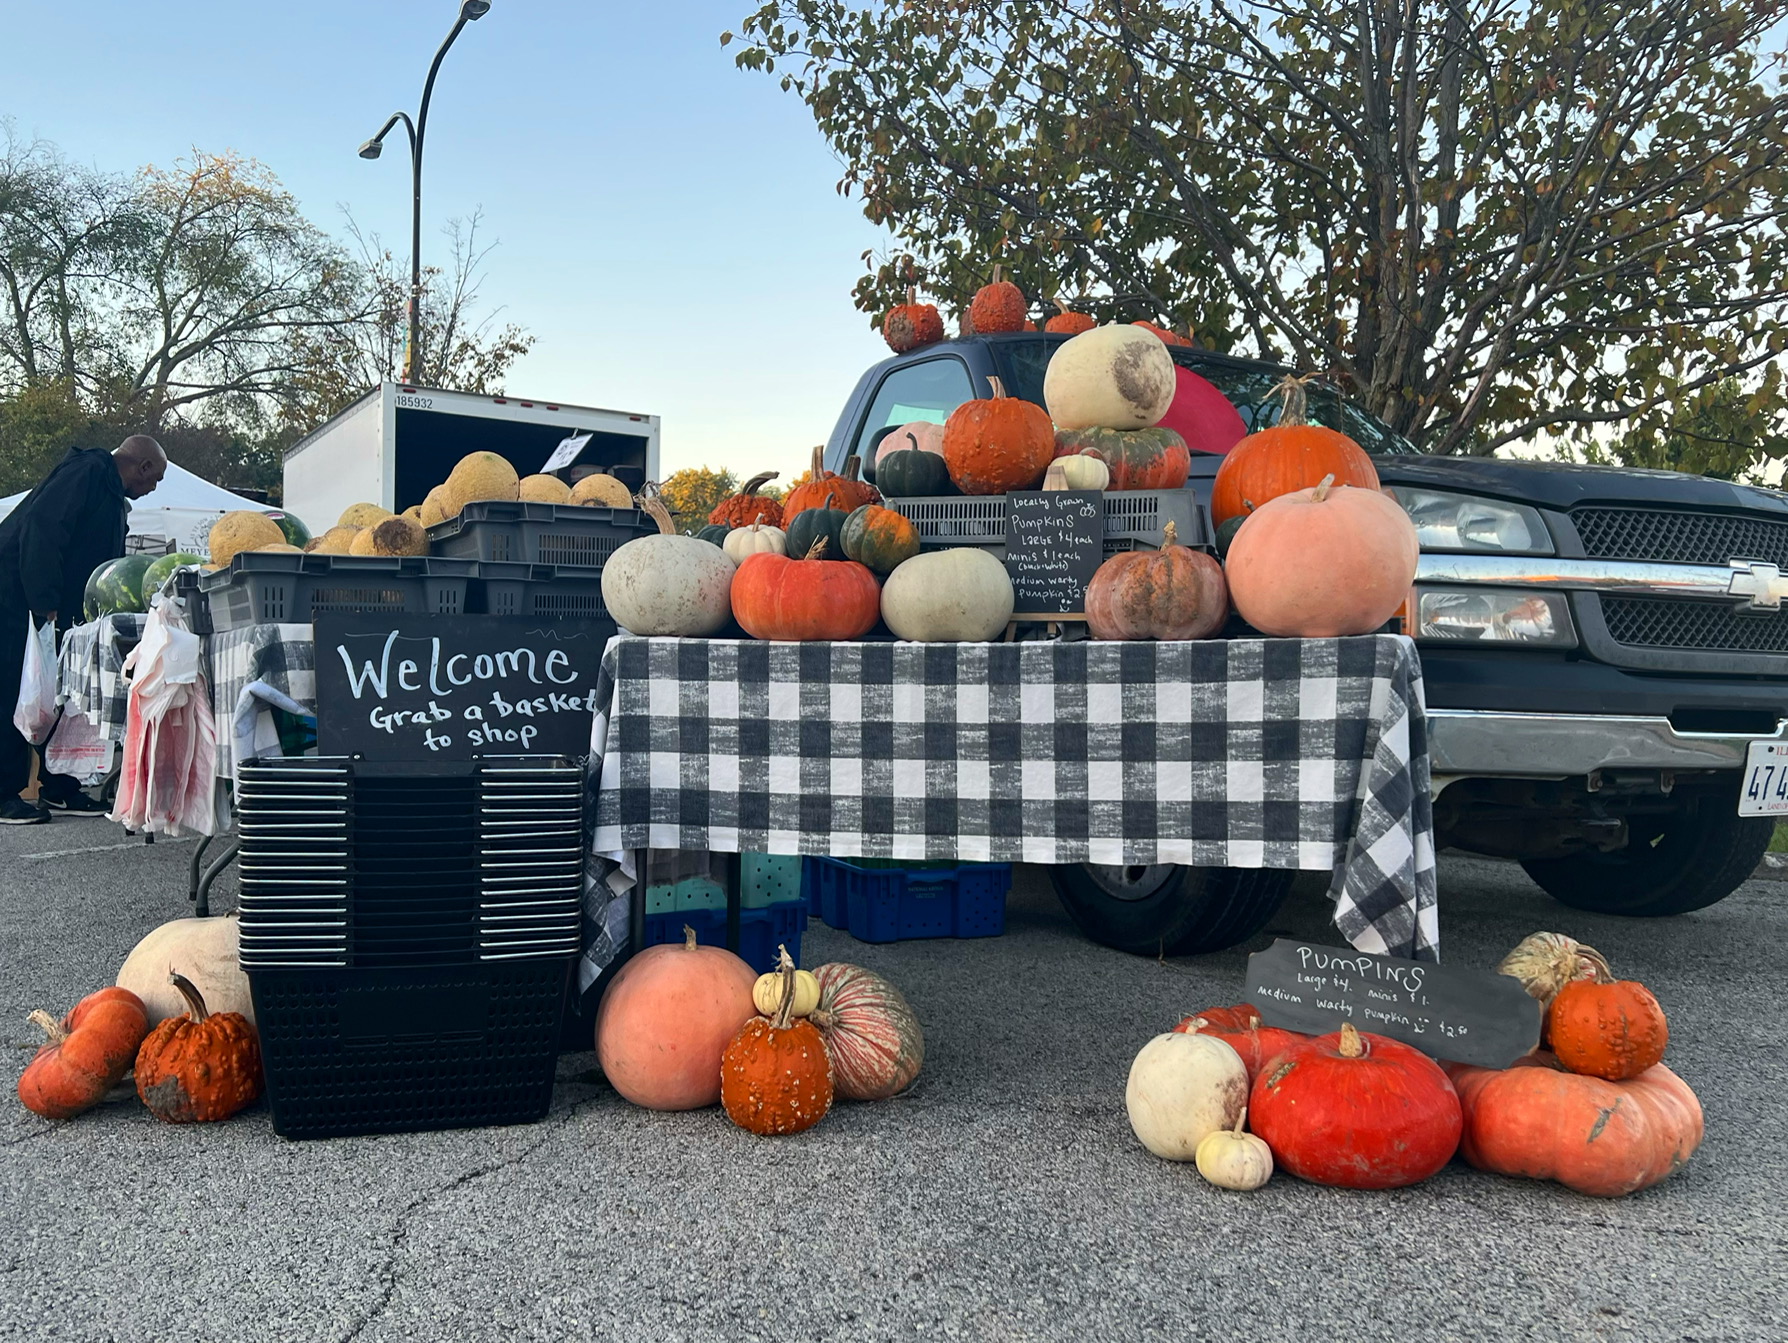 At the Urbana Market at the Square, Meyer Produce has a pumpkin table and pumpkins for sale on the parking lot ground. Photo by Alyssa Buckley.